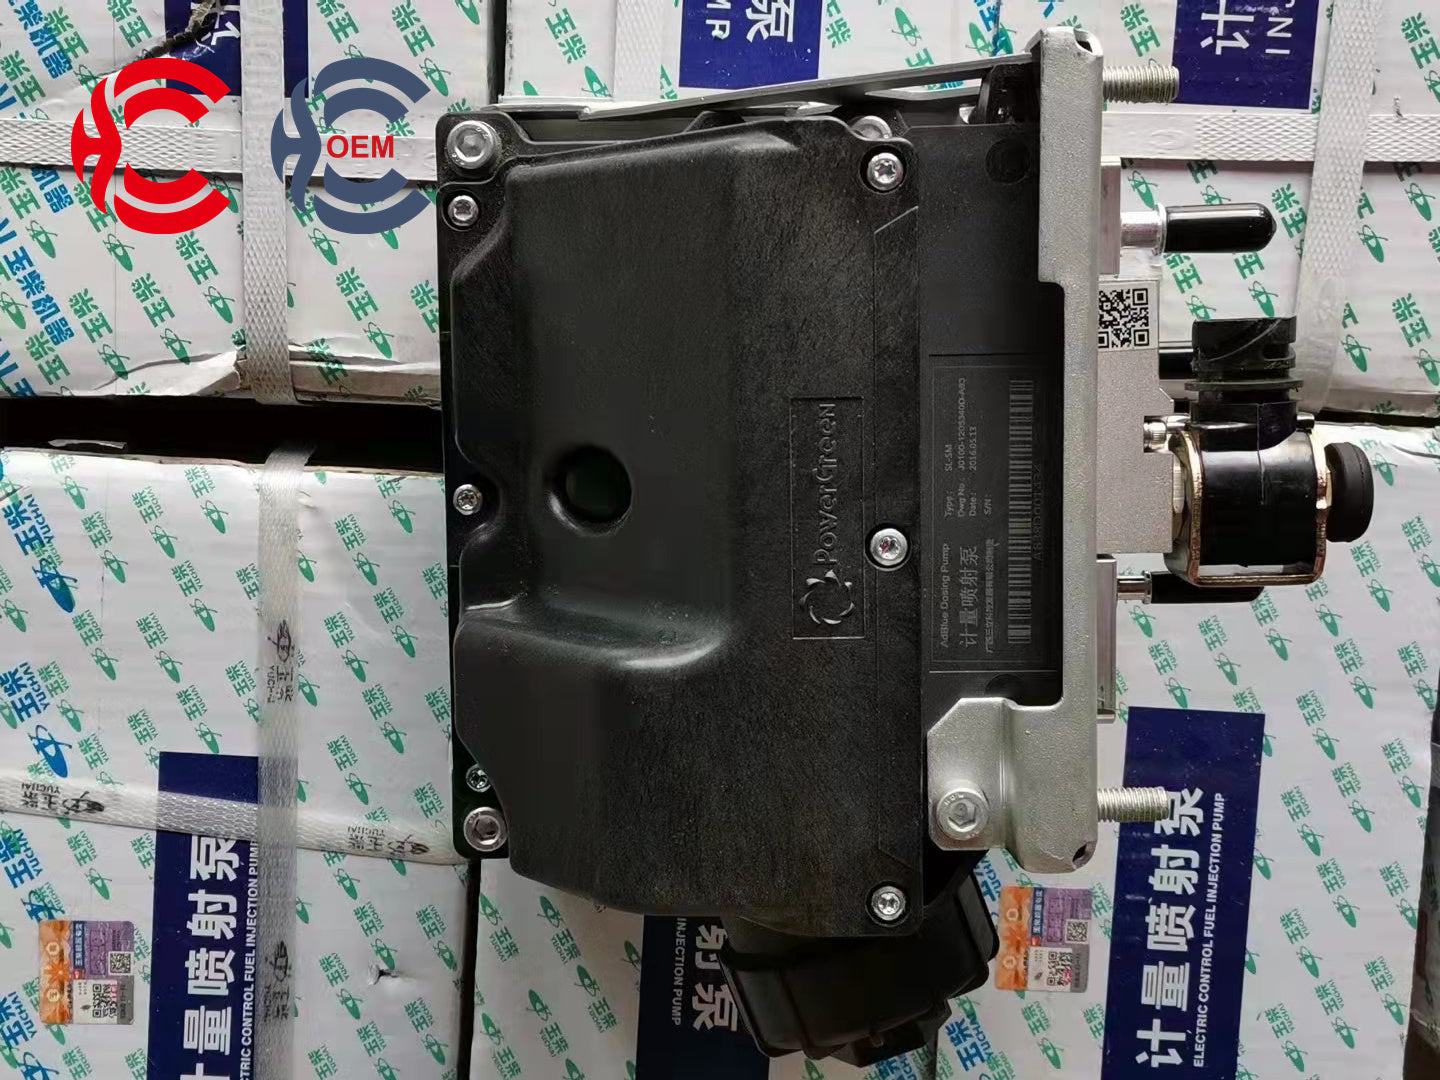 OEM: J0100-1205340D POWERGREENMaterial: ABS metalColor: black silverOrigin: Made in ChinaWeight: 1000gPacking List: 1* Adblue Pump More ServiceWe can provide OEM Manufacturing serviceWe can Be your one-step solution for Auto PartsWe can provide technical scheme for you Feel Free to Contact Us, We will get back to you as soon as possible.